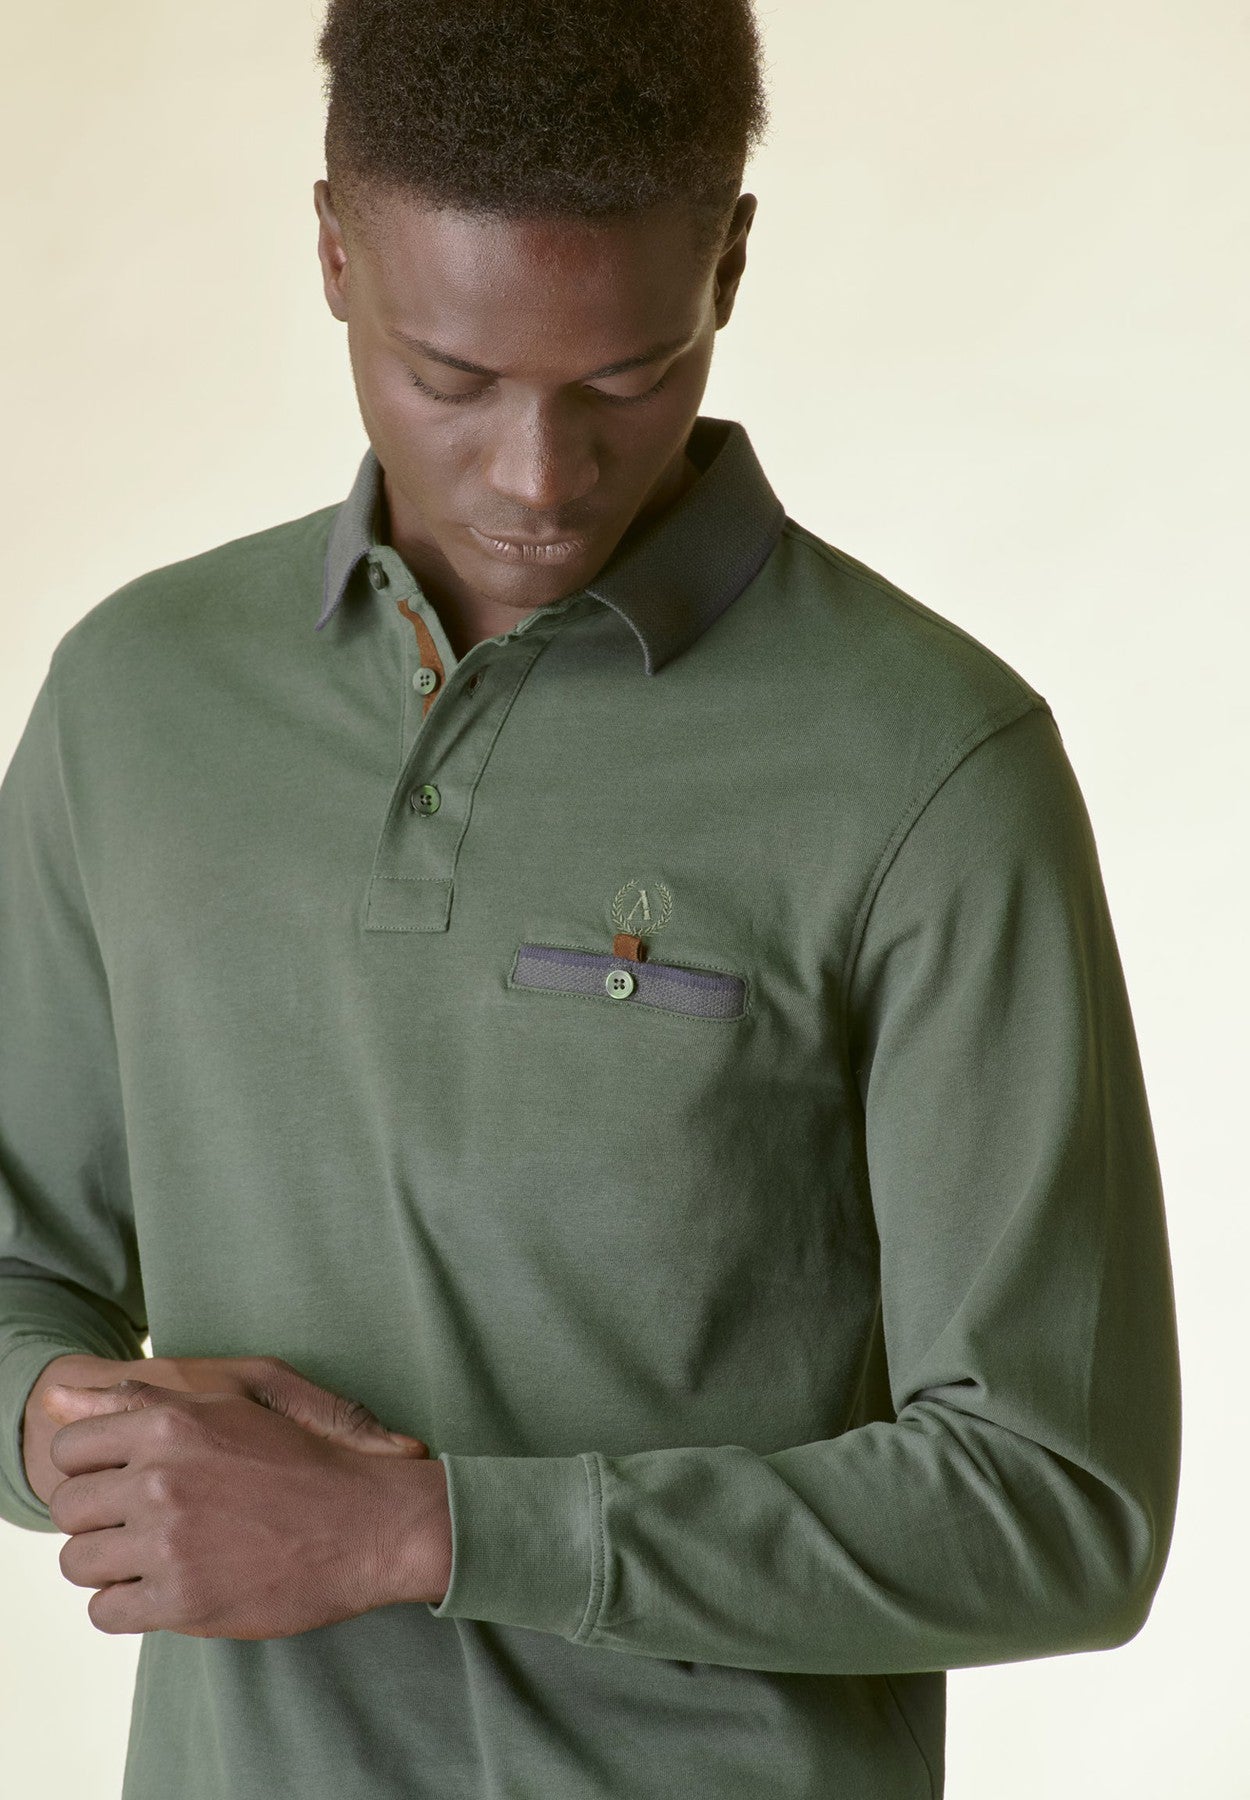 Green Faded polo matching embroidery inserted pocket